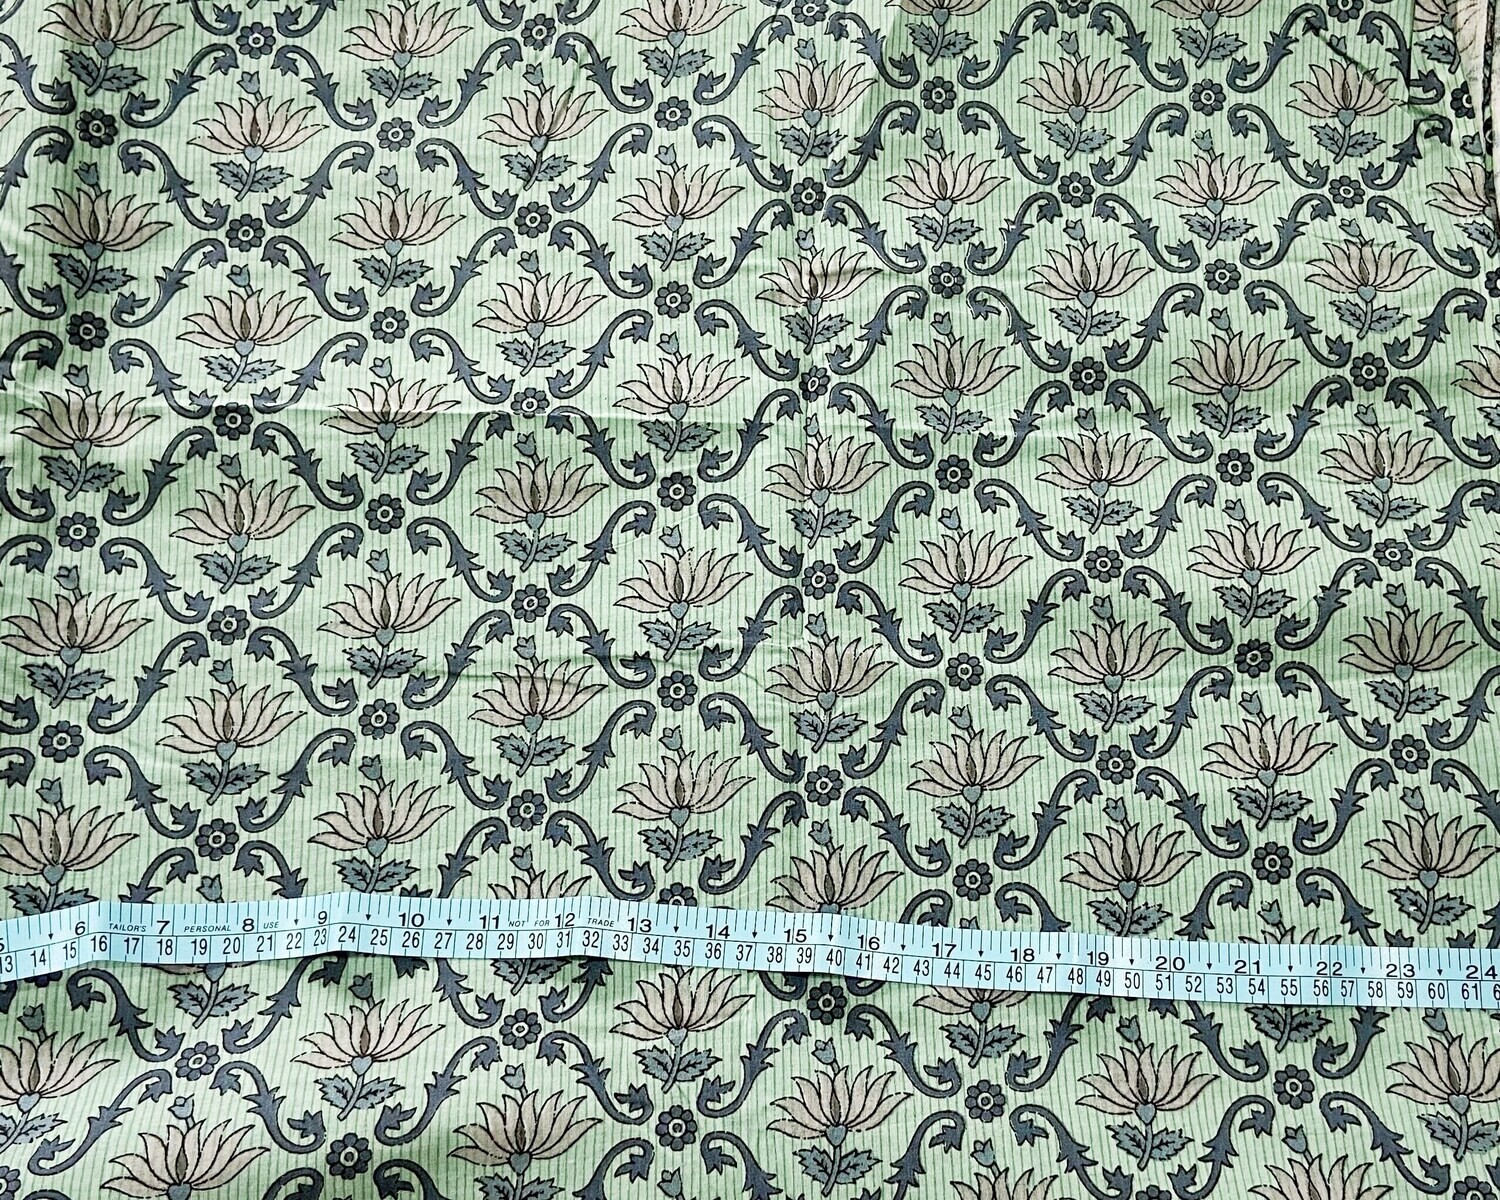 Lotus Print Block Print Cotton Fabric in Teal Green, Dress Materials, 44 Inches Wide